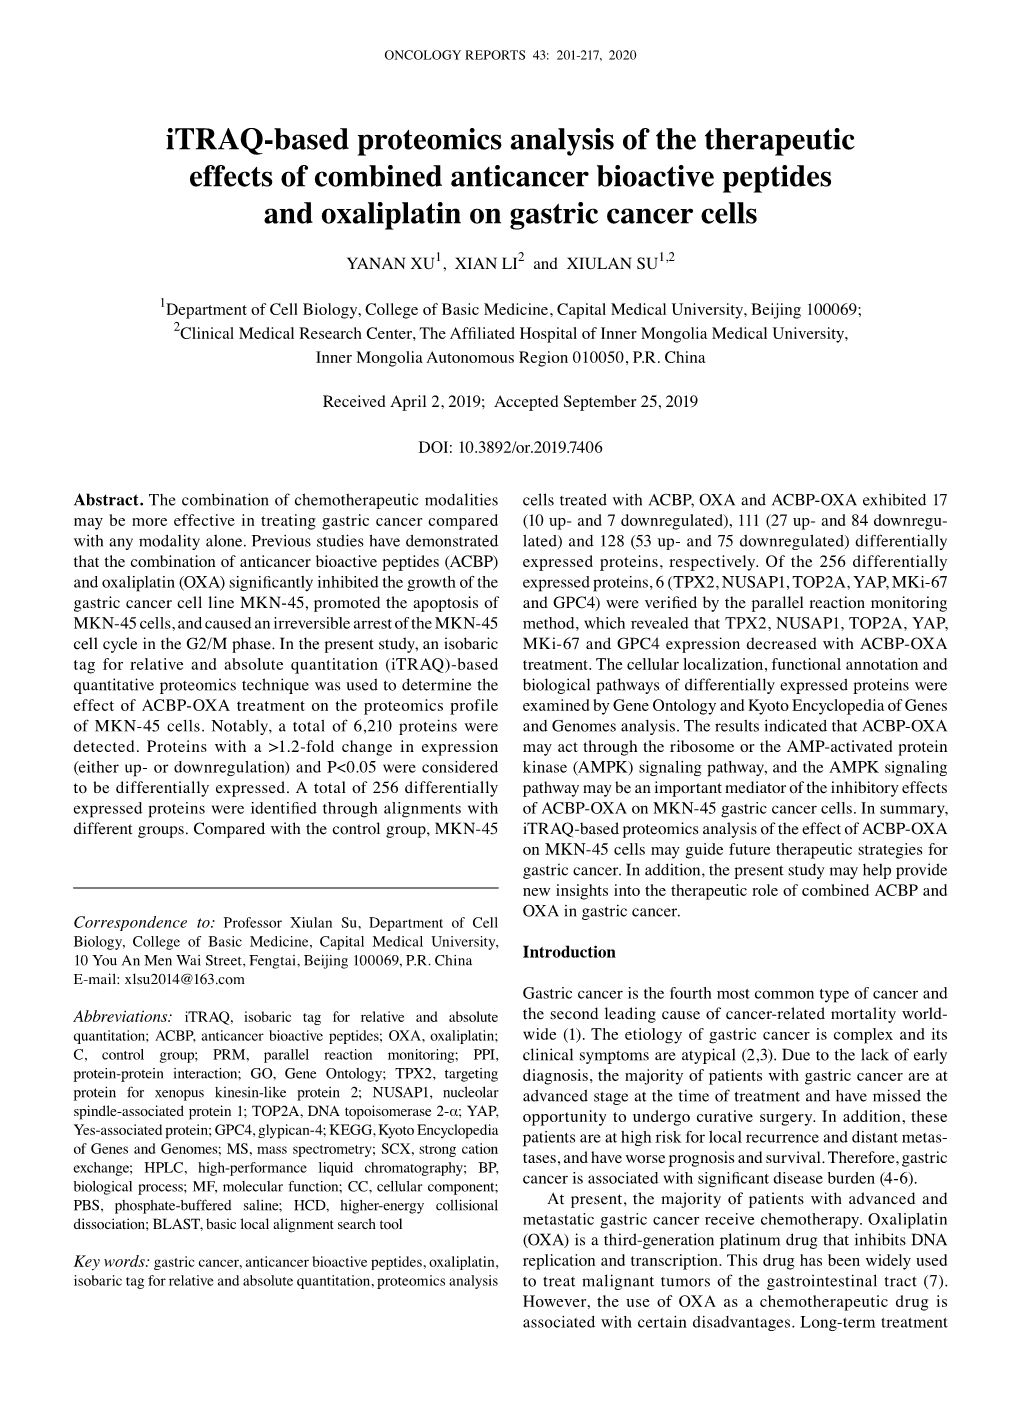 Itraq‑Based Proteomics Analysis of the Therapeutic Effects of Combined Anticancer Bioactive Peptides and Oxaliplatin on Gastric Cancer Cells